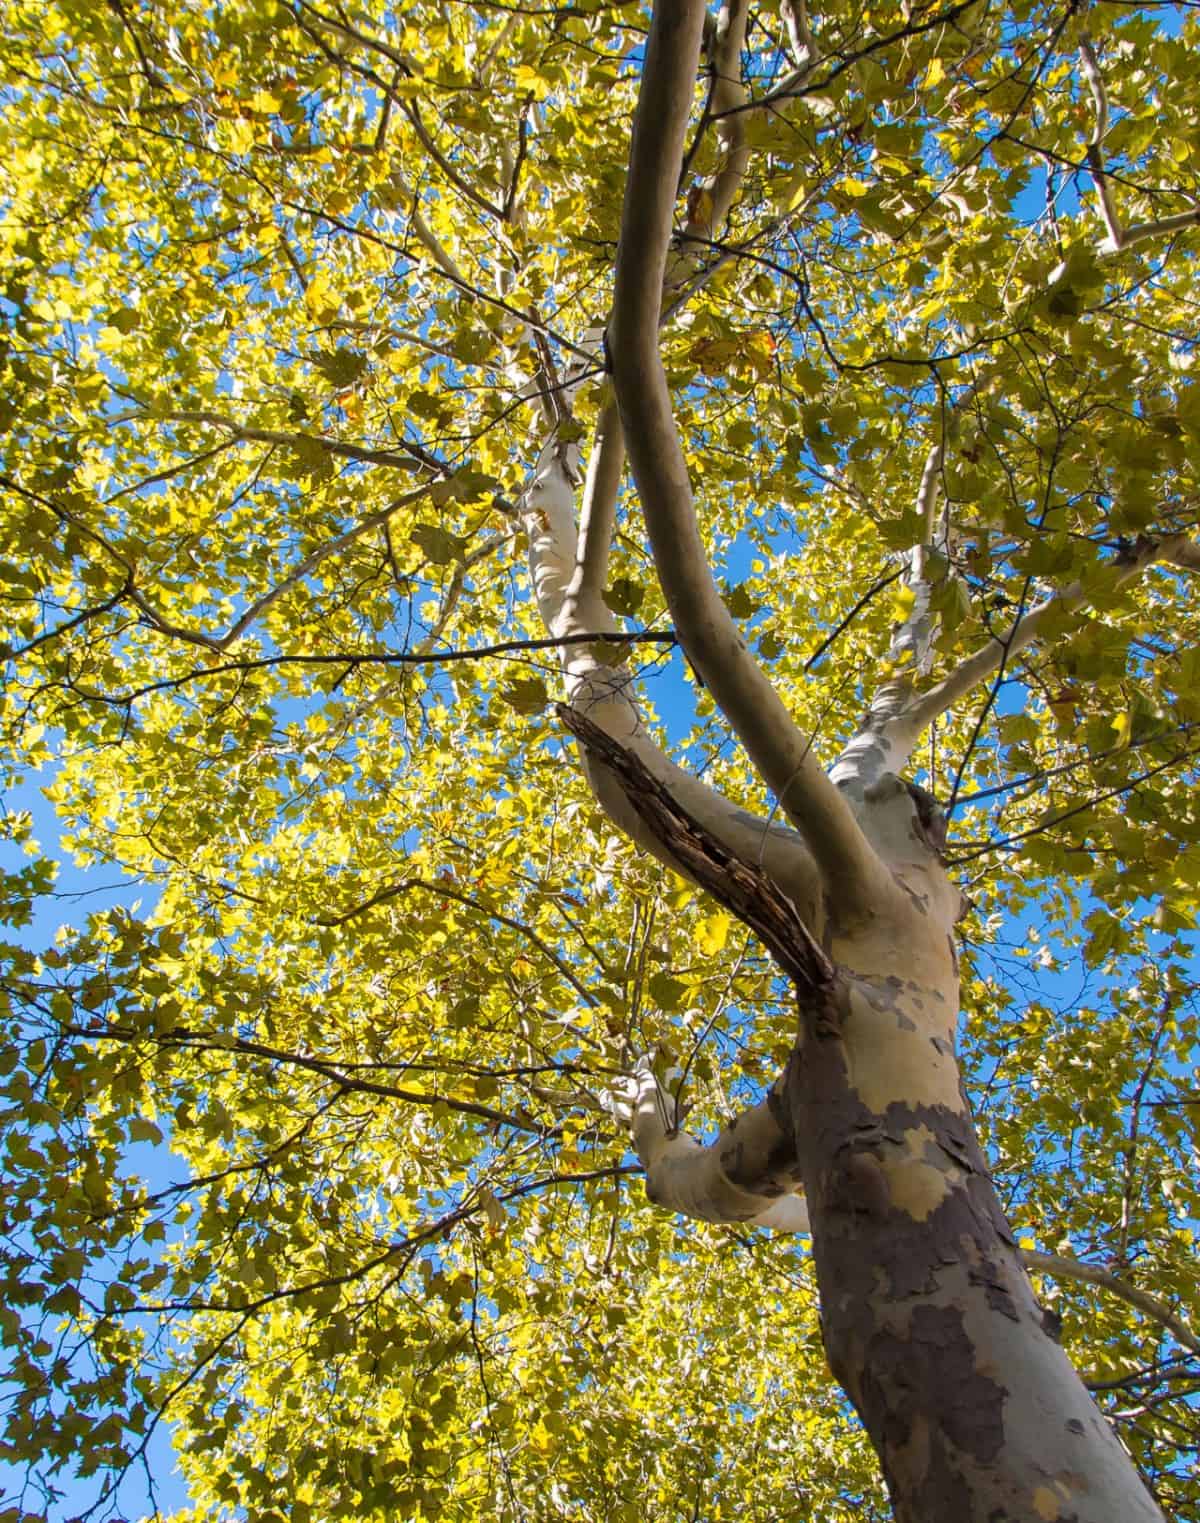 The American sycamore is a huge tree with lots of shade potential.